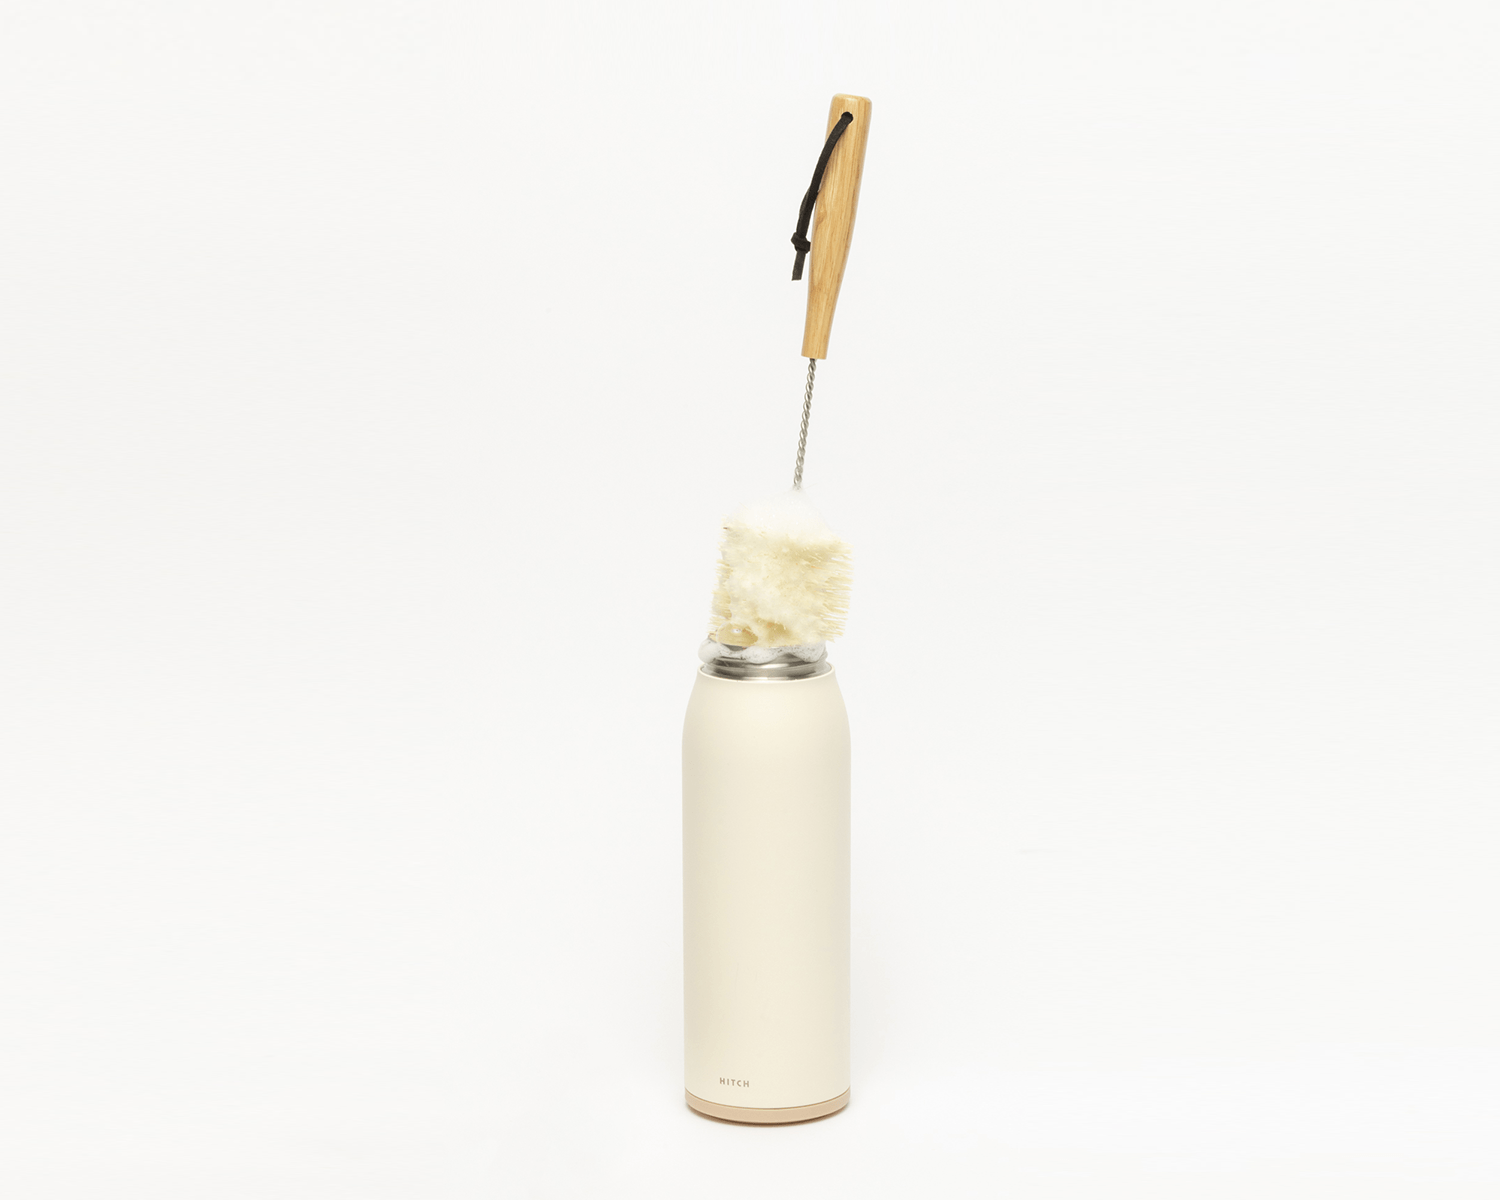 Hitch Bottle Brush with Natural Sisal Fibers, a stainless steel rod, and wooden handle cleaning the Hitch Bottle and Cup in Natural White